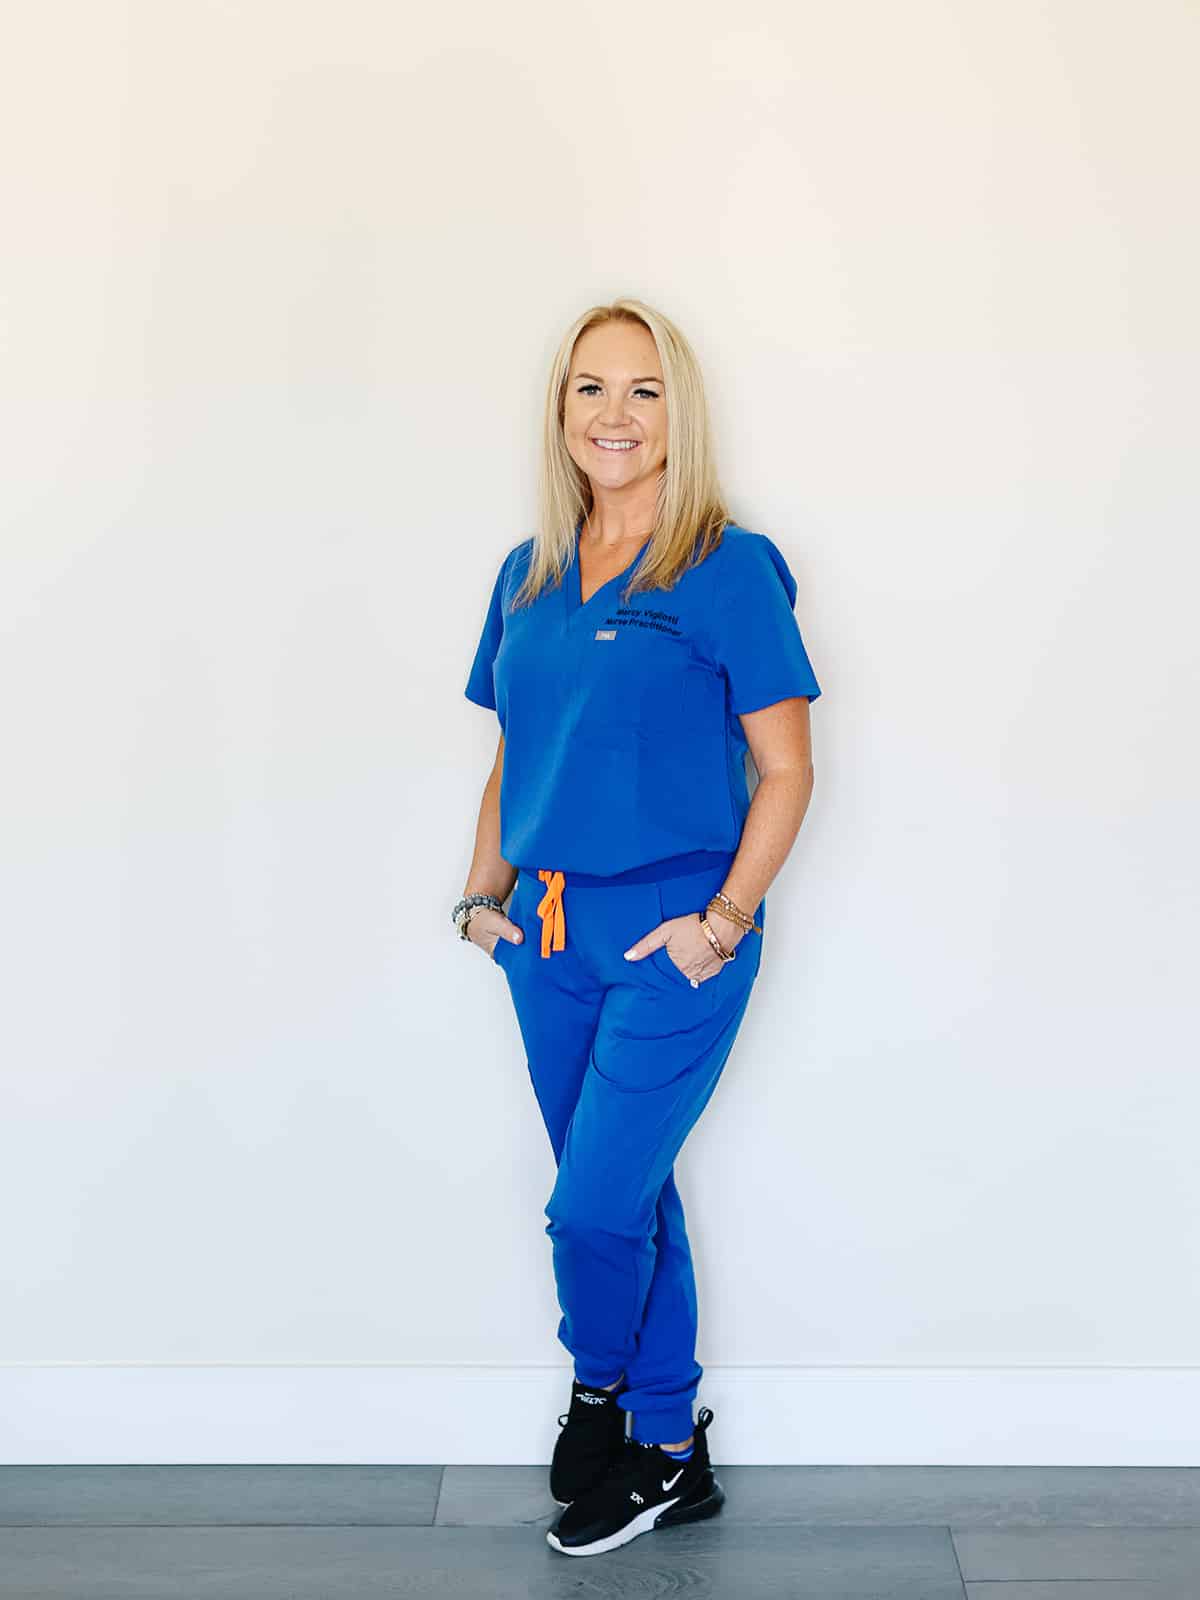 Meet successful business owner, Marcy Vigliotti, NP-C, an aesthetic nurse injector, medical wellness expert, and founder of Serafina Skin. In this post, she breaks down the 6 steps she took to take her journey into opening a Botox business!